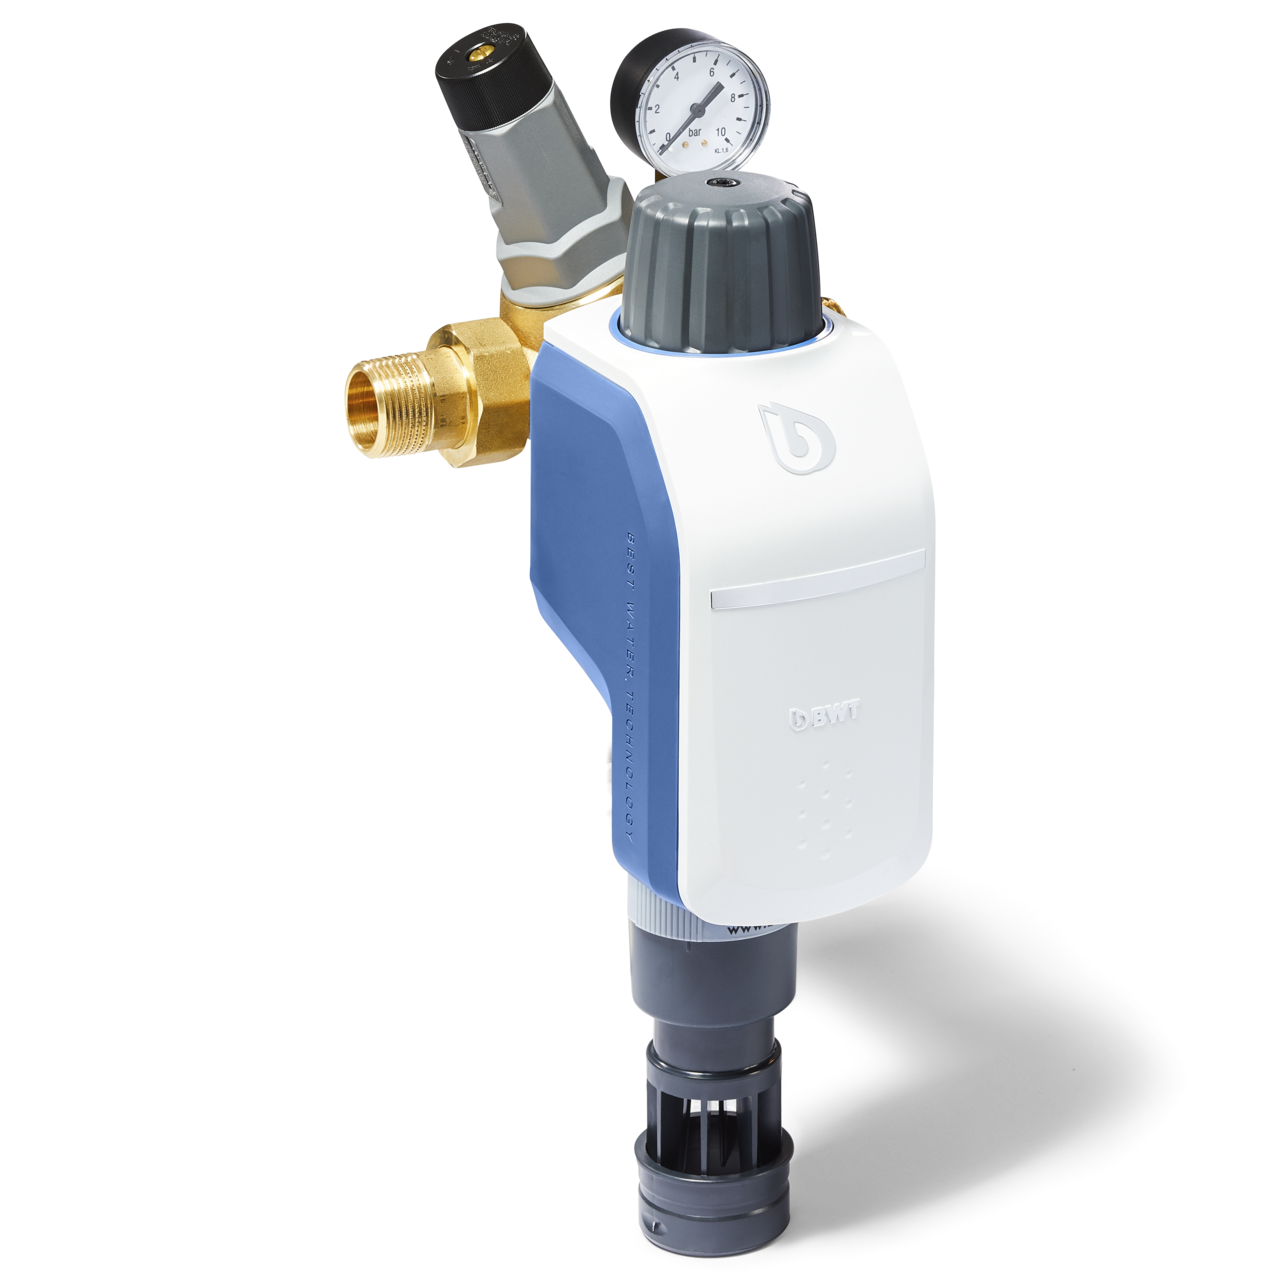 Innovative domestic water filters from BWT